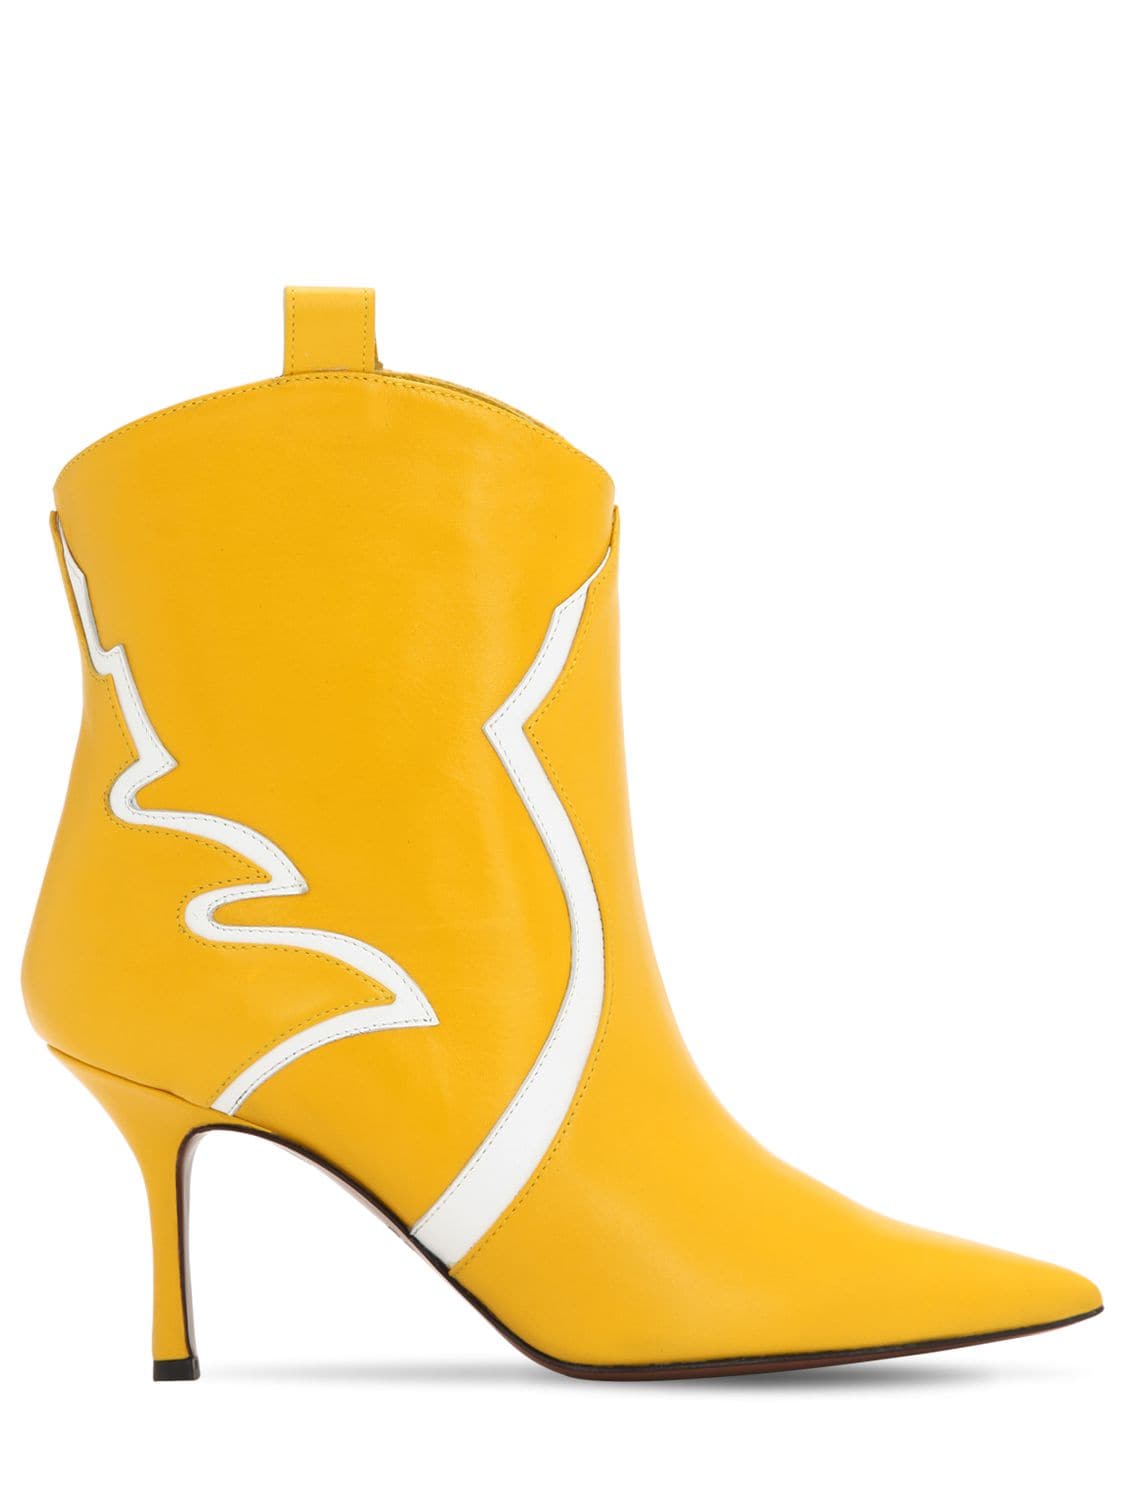 Around The Brand 70mm Leather Ankle Boots In Yellow,white